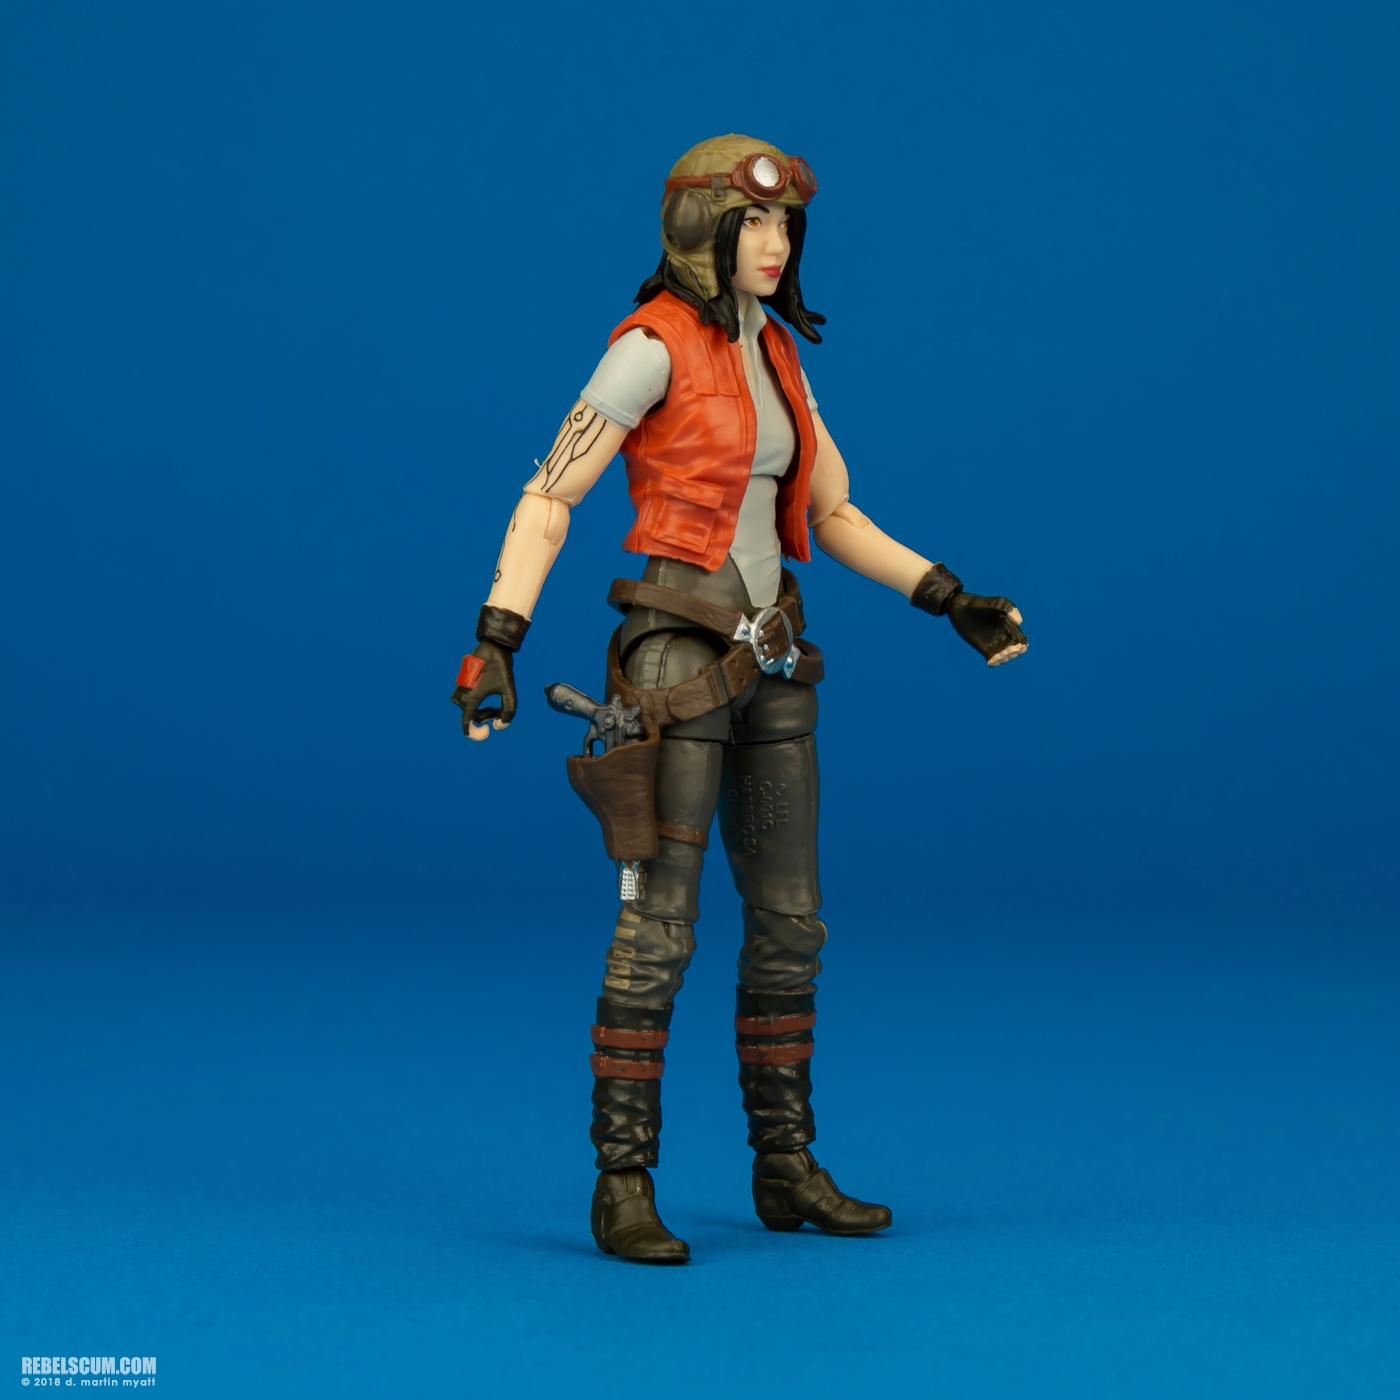 VC129-Doctor-Aphra-The-Vintage-Collection-Hasbro-006.jpg